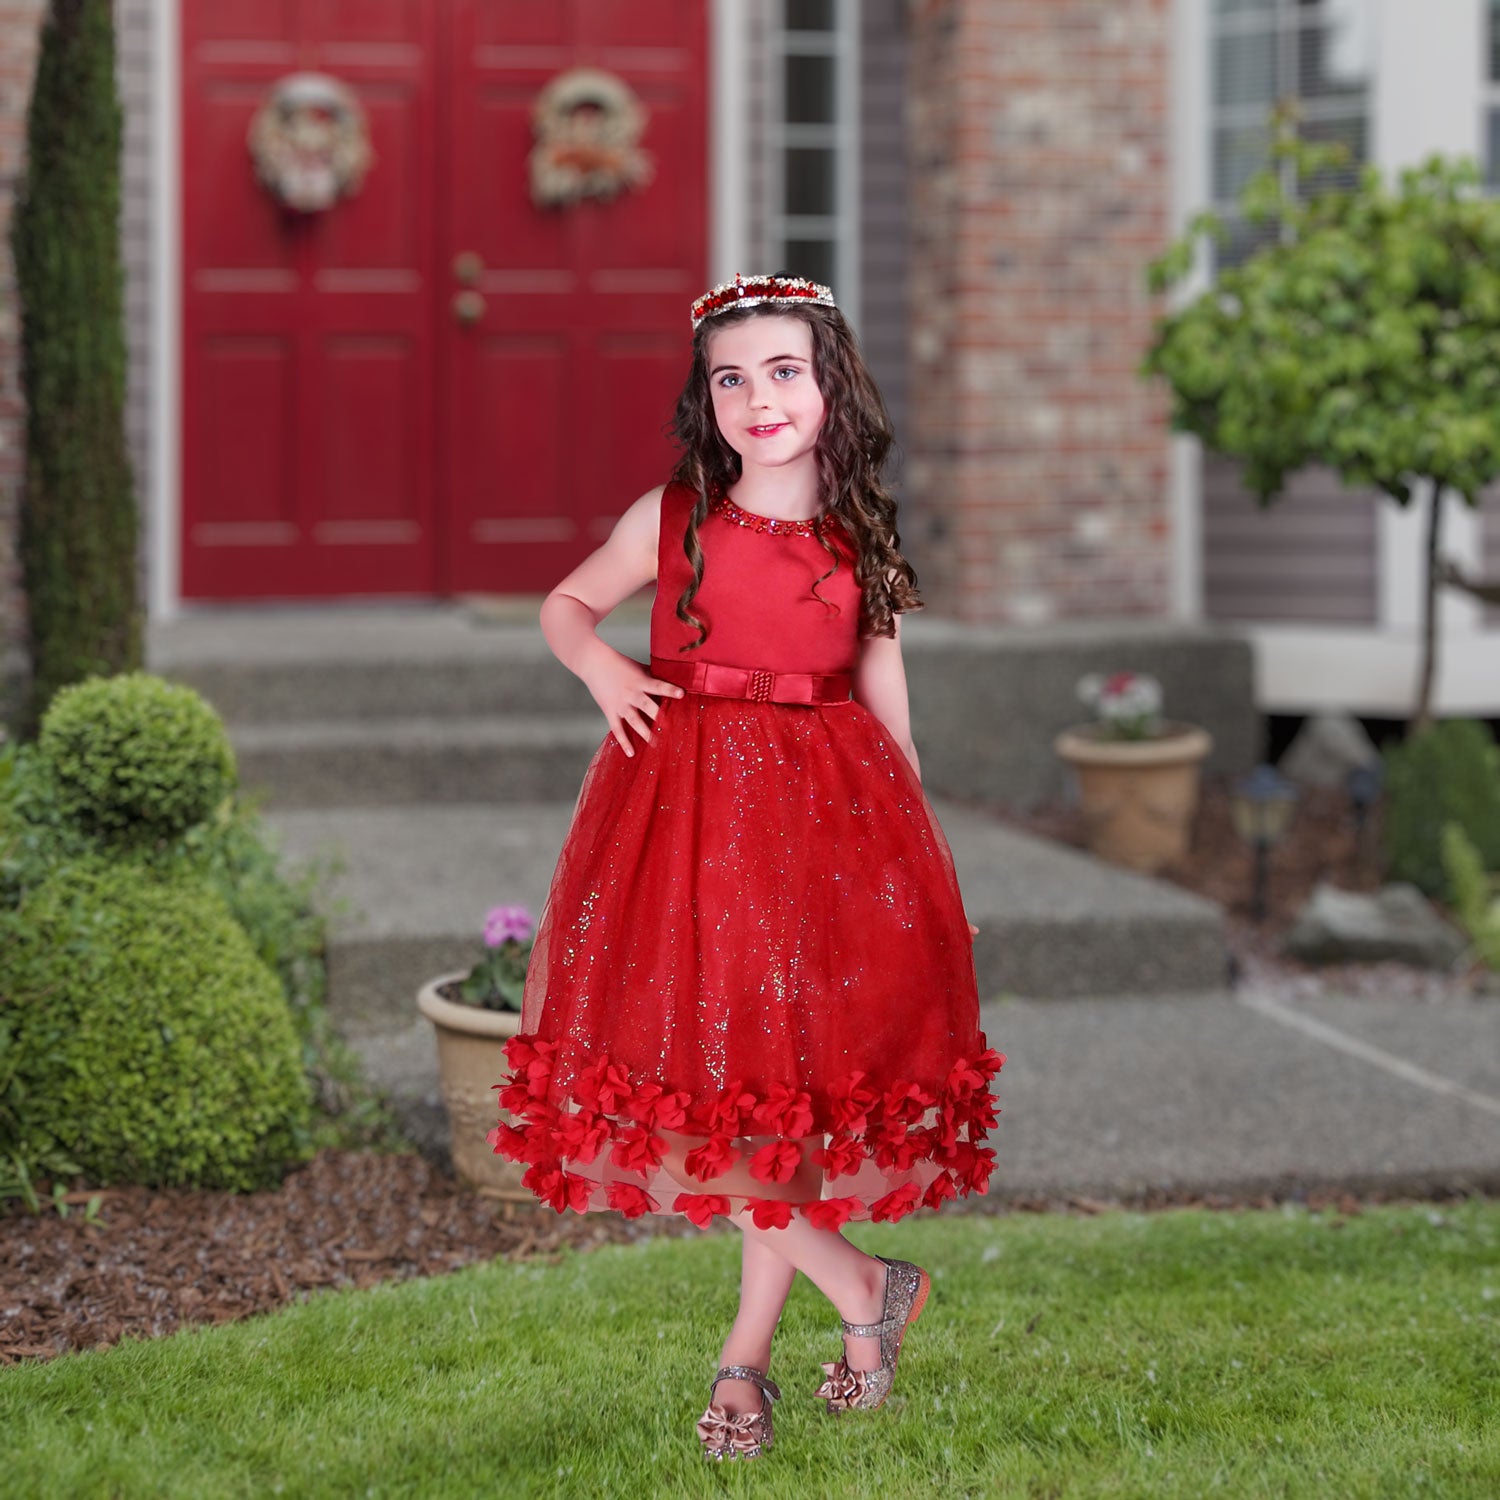 Red gown for kids | Kids gown, Red gowns, Kids wear